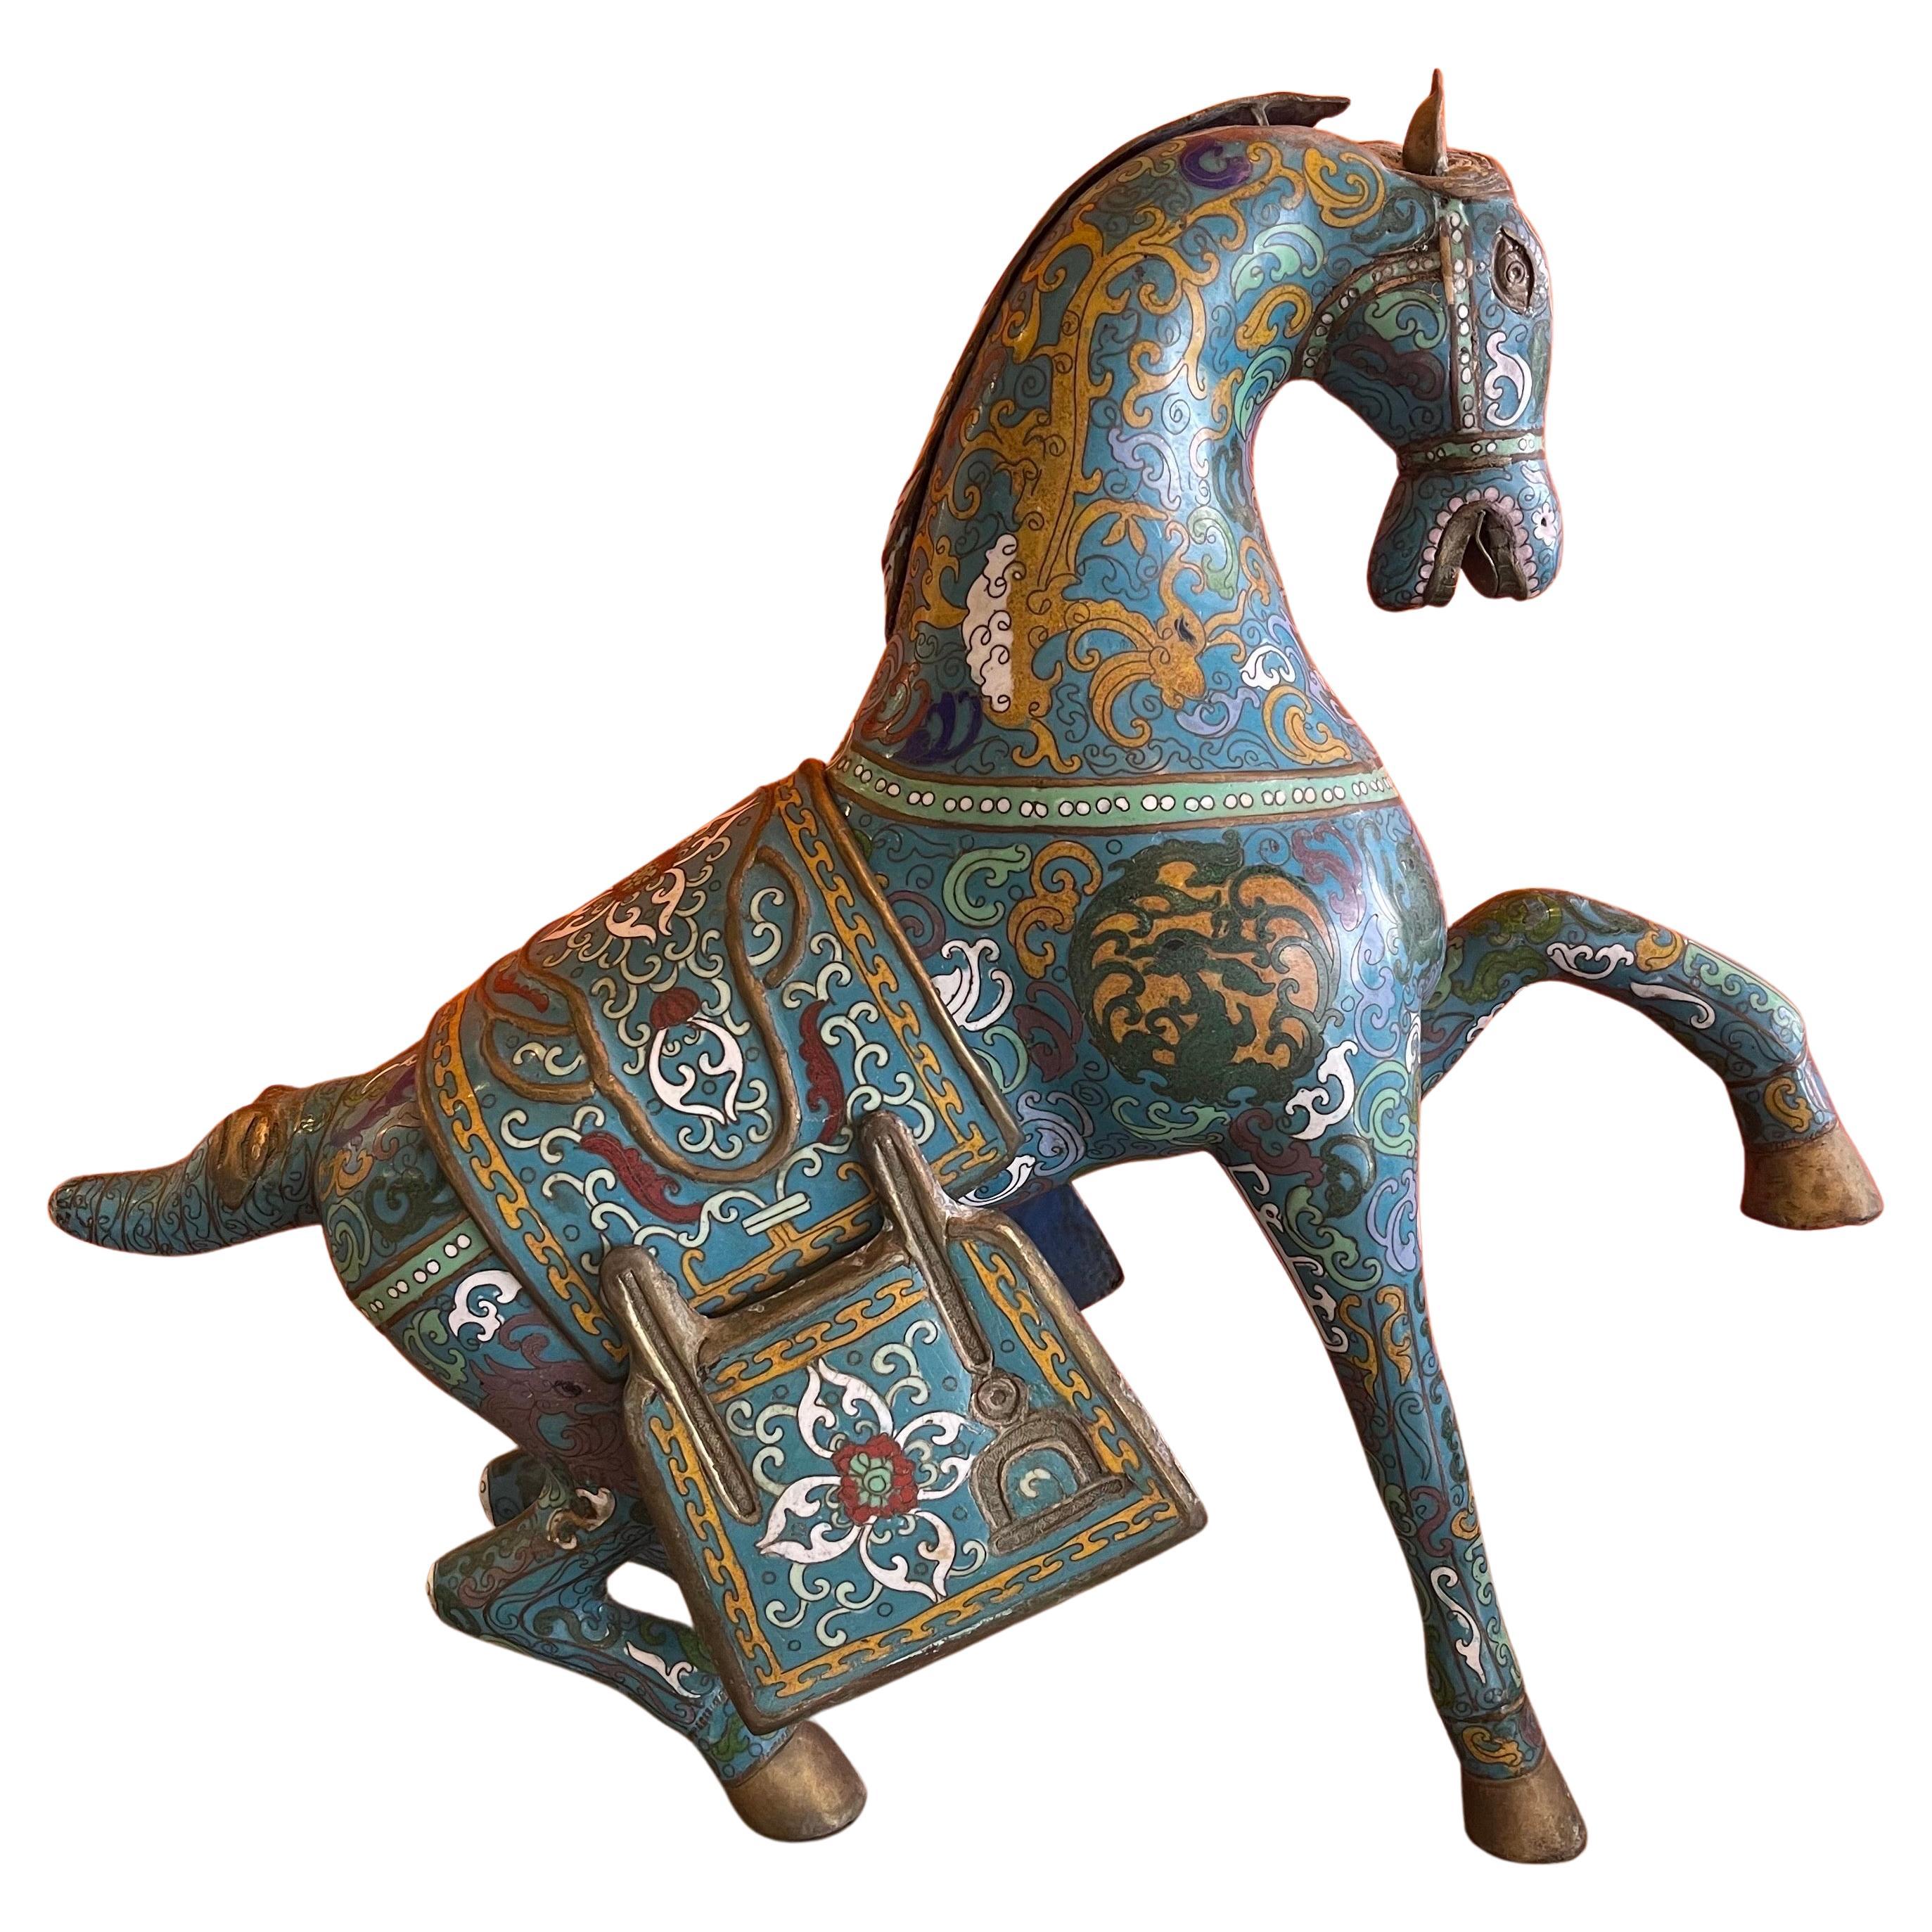 Large antique Chinese cloisonné Tang horse sculpture, circa 1940s. The piece is substantial in size and is decorated in colorful mythical theme patterns with detachable saddle and mane. The cloisonné work is enameled predominantly in old blue while